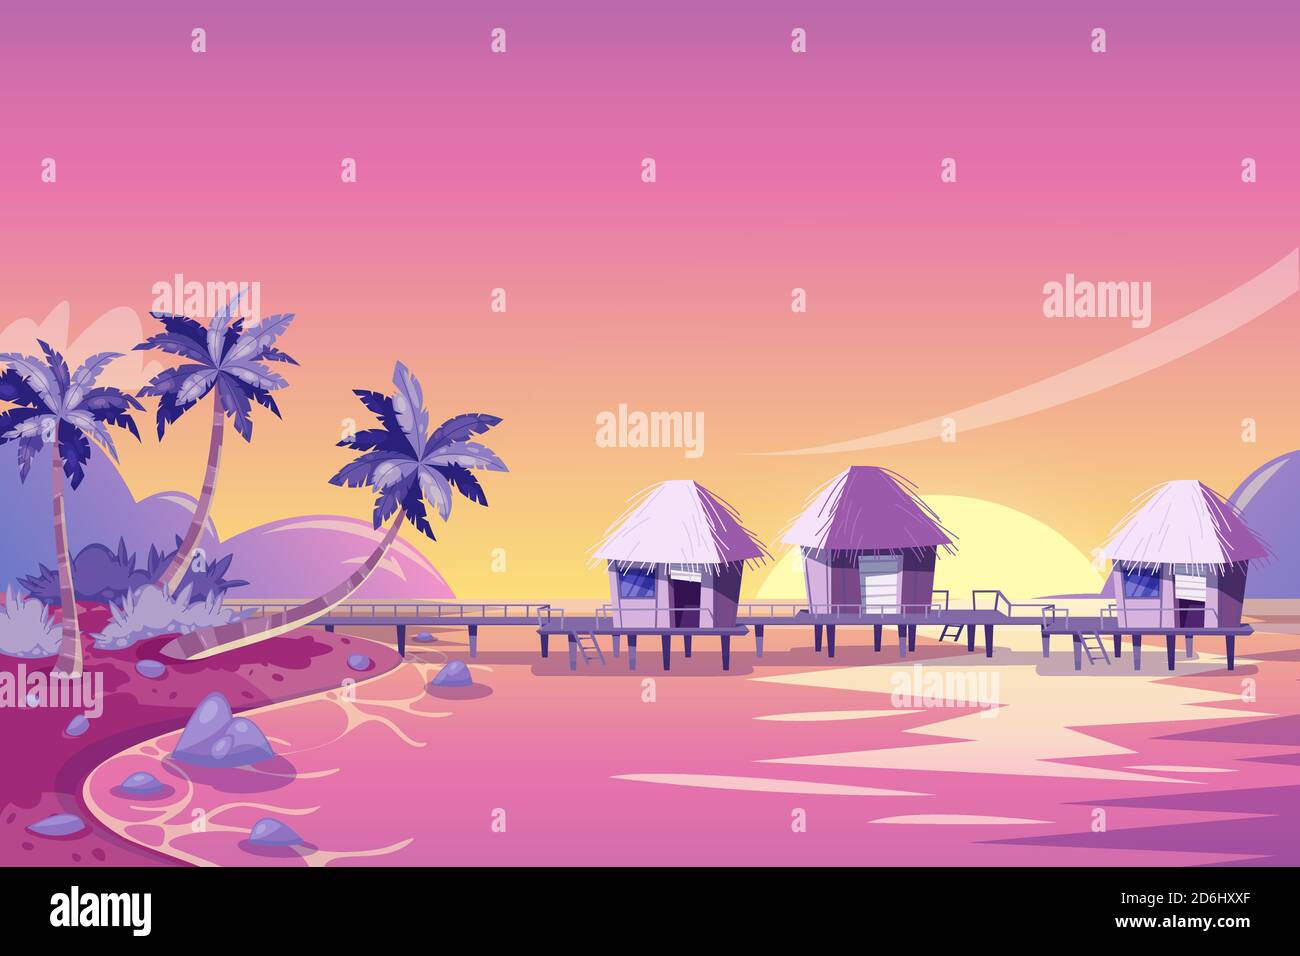 Tropical island pink sunset landscape. Vector cartoon illustration. Palms, beach and bungalows in the ocean. Summer travel background. Stock Vector